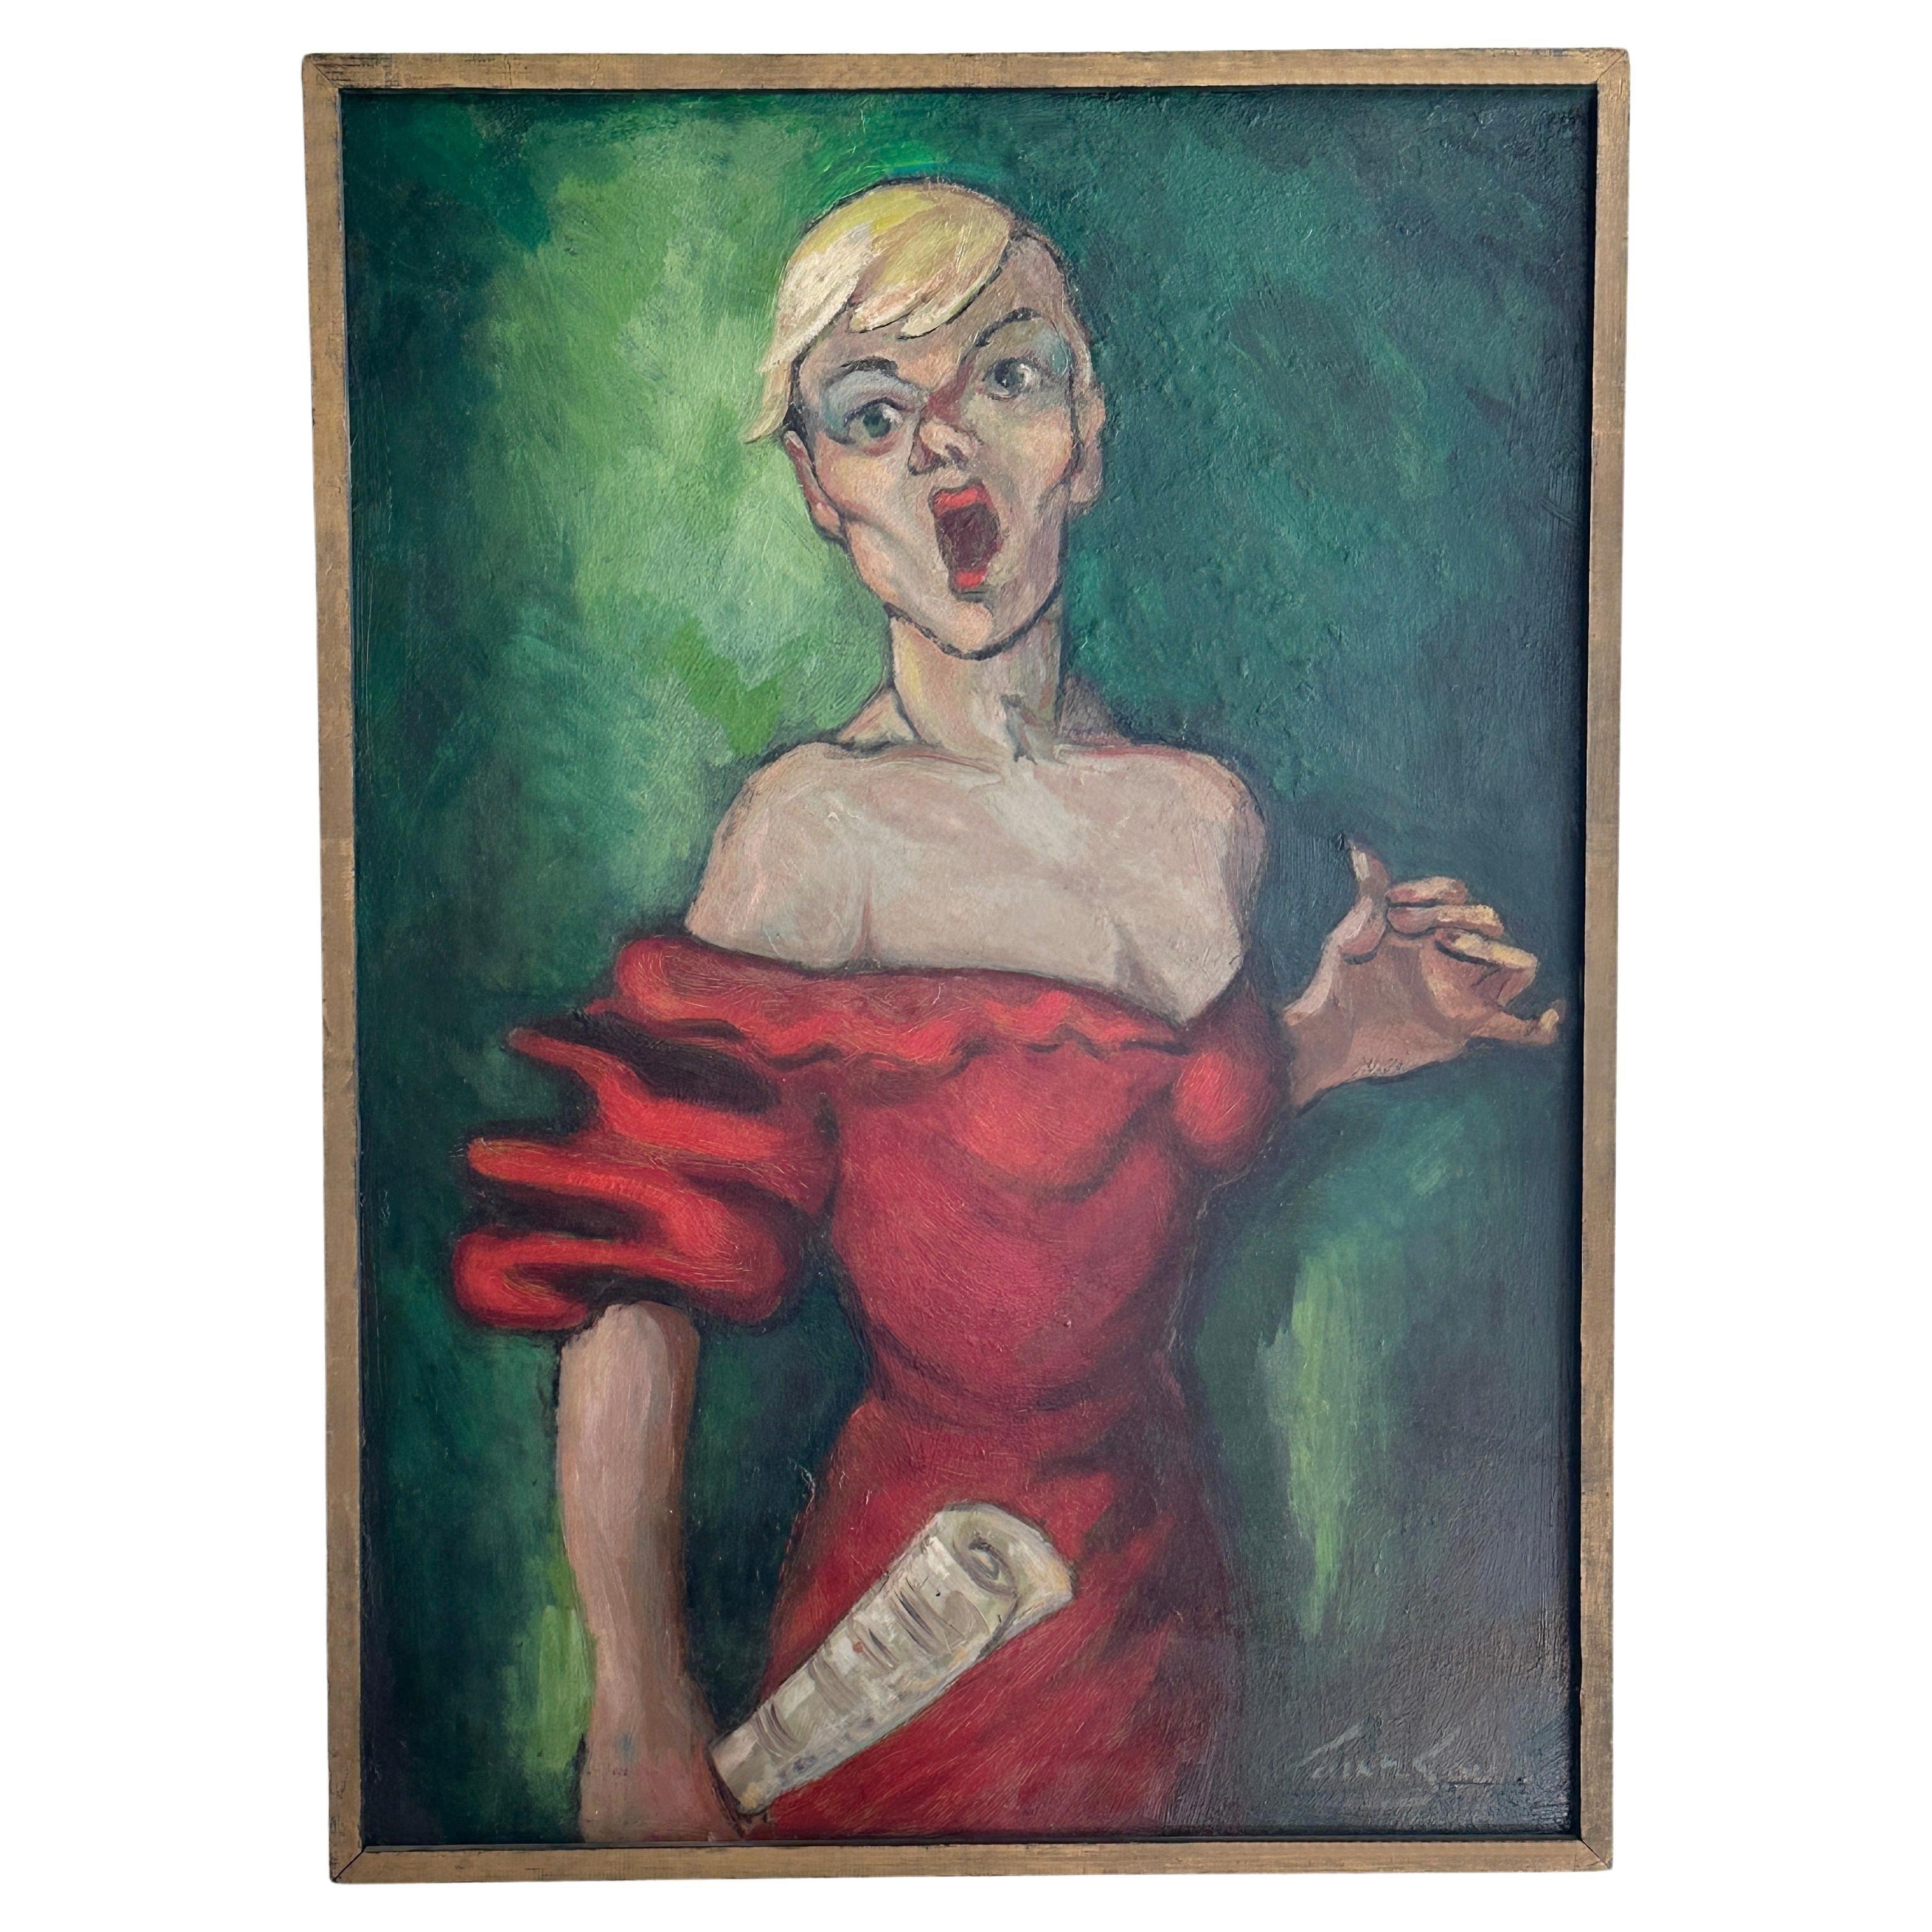 Expressionism, a revolutionary art movement of the early 20th century, aimed to elicit emotional responses, often exposing the harshest and most tumultuous aspects of the human condition and psyche. With this oil portrait of a lyrical singer, the